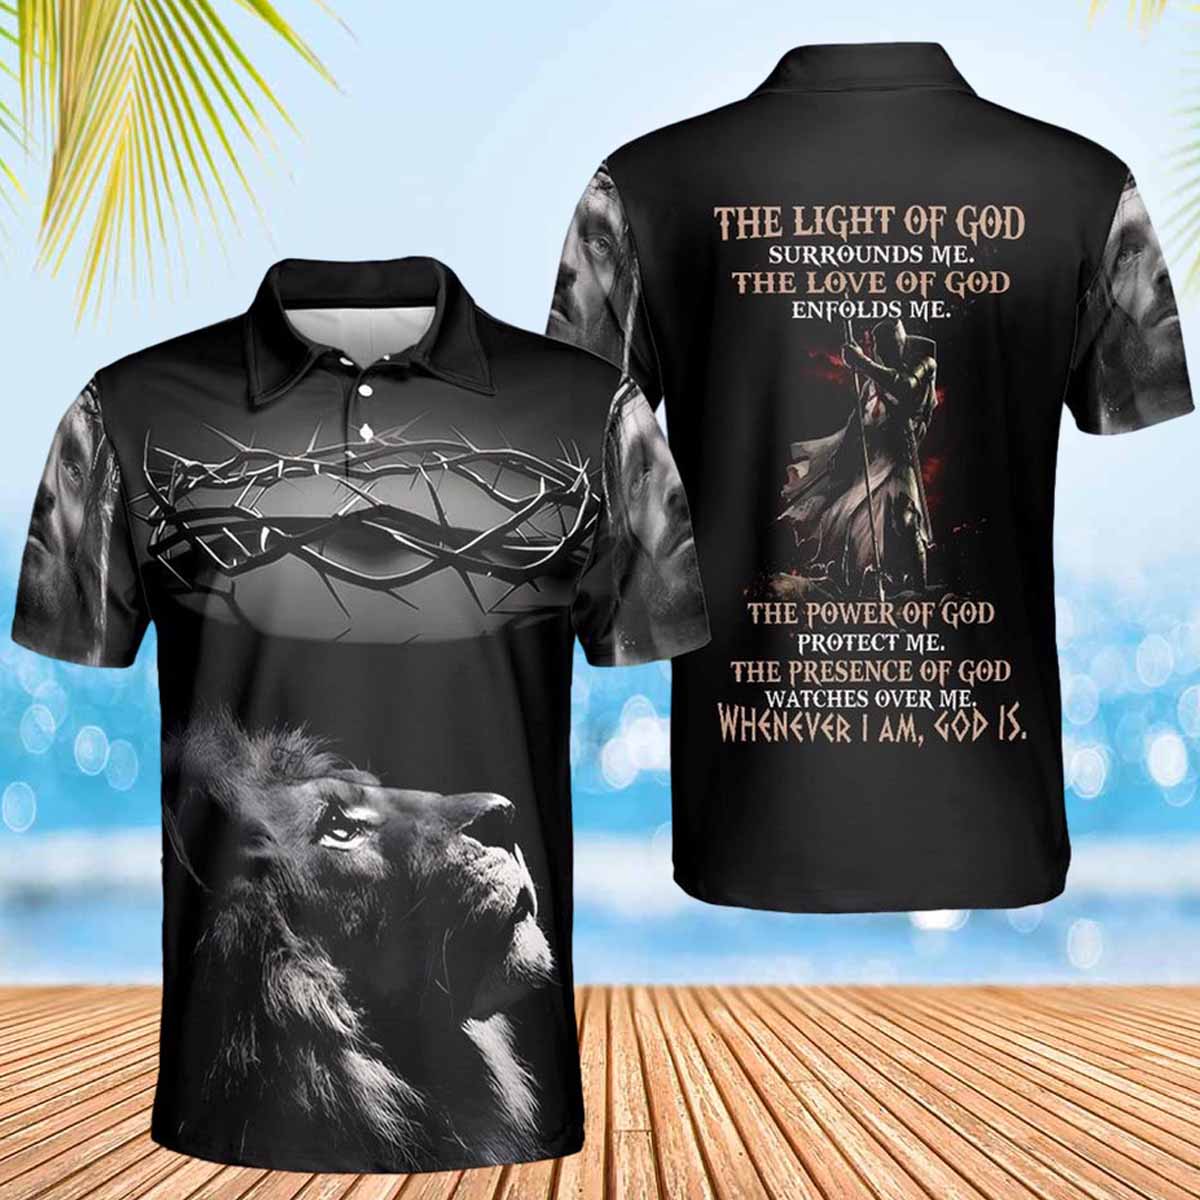 The Light Of God Surround Me Jesus Polo Shirts - Christian Shirt For Men And Women